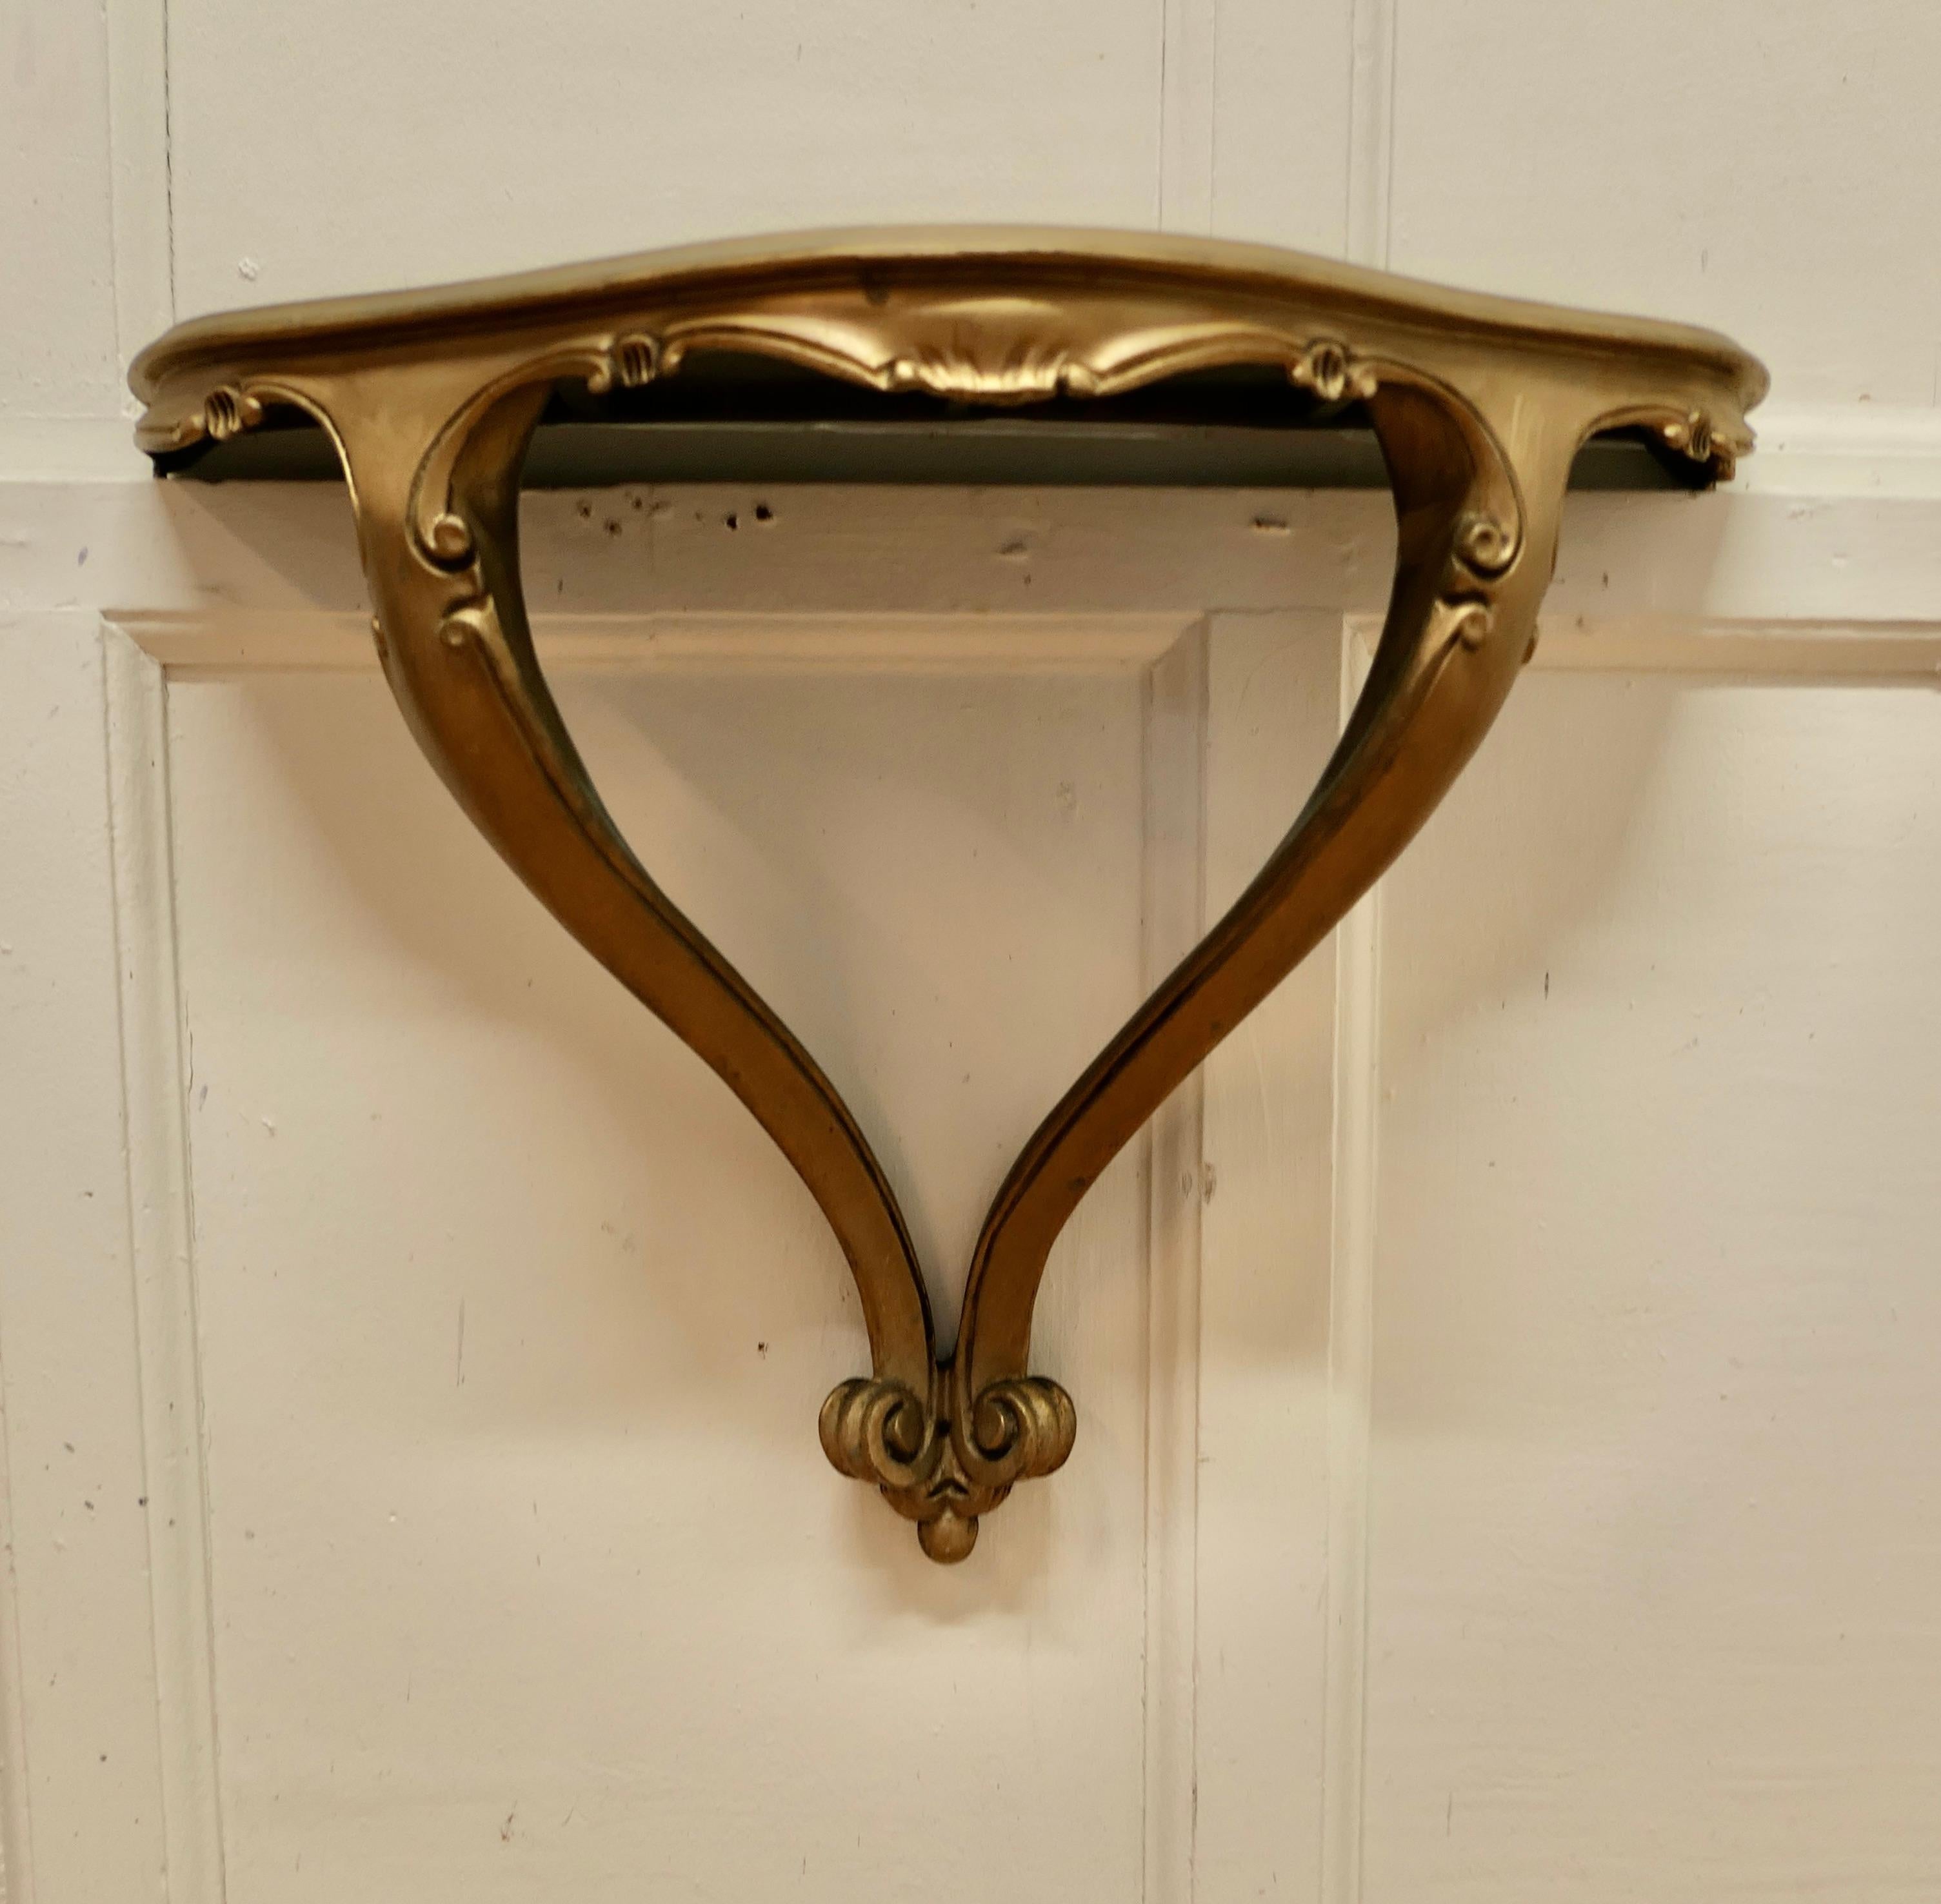 Charming, French carved gilt console wall shelf.

A beautifully carved little gilt shelf, it has a serpentine shaped top and a double wall fixing leg
This is a delicate little piece and the Gold has darkened with age 
The shelf is in good